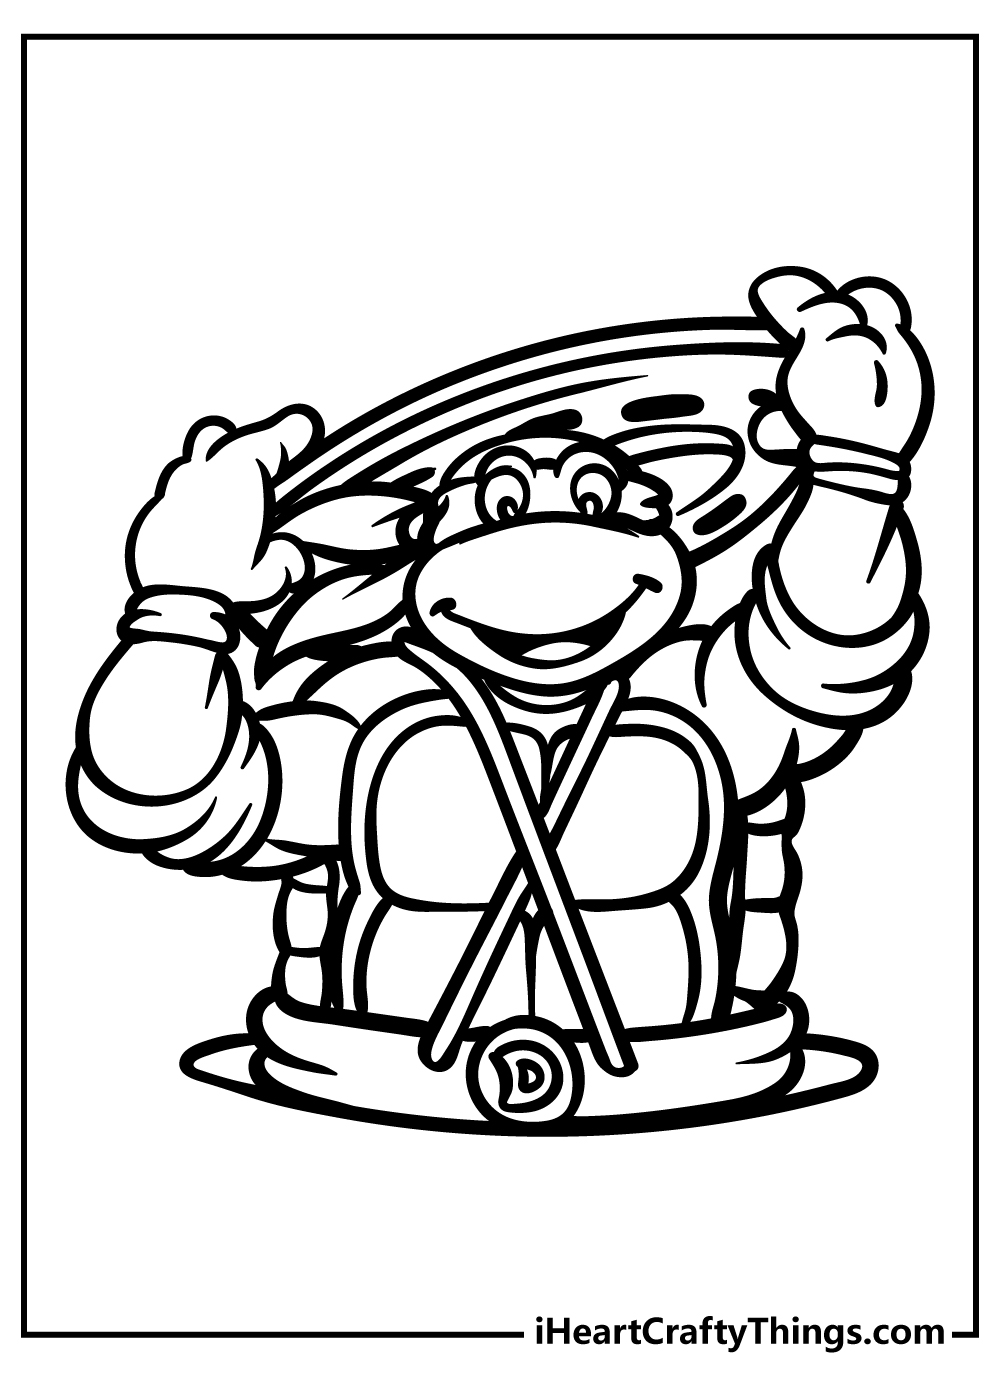 Ninja Turtles Coloring Pages for kids free download